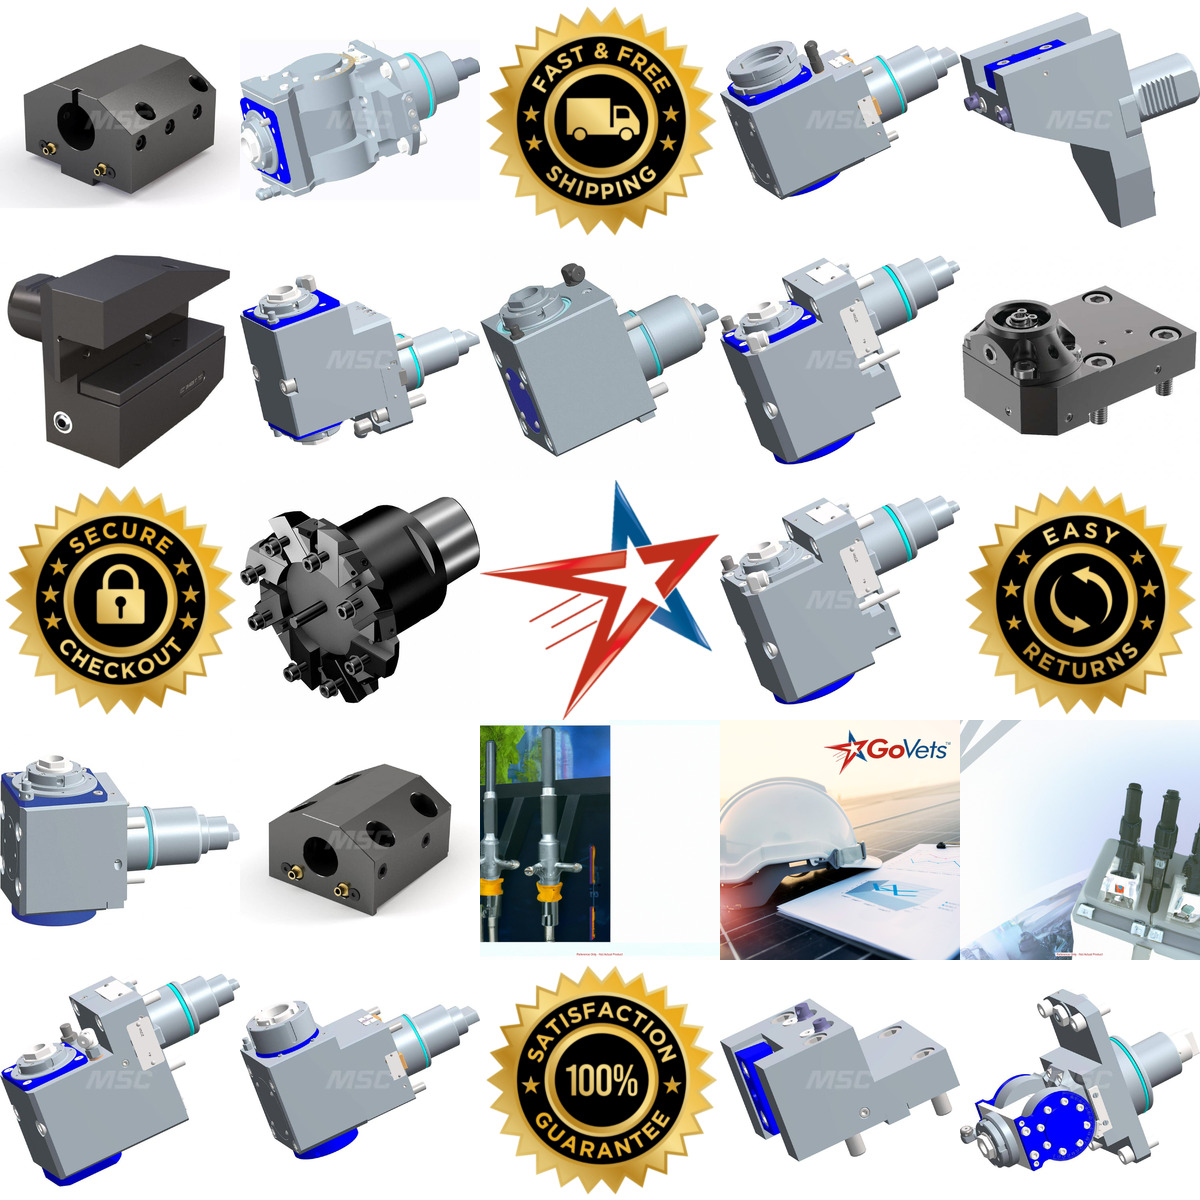 A selection of Turret and Vdi Tool Holders products on GoVets